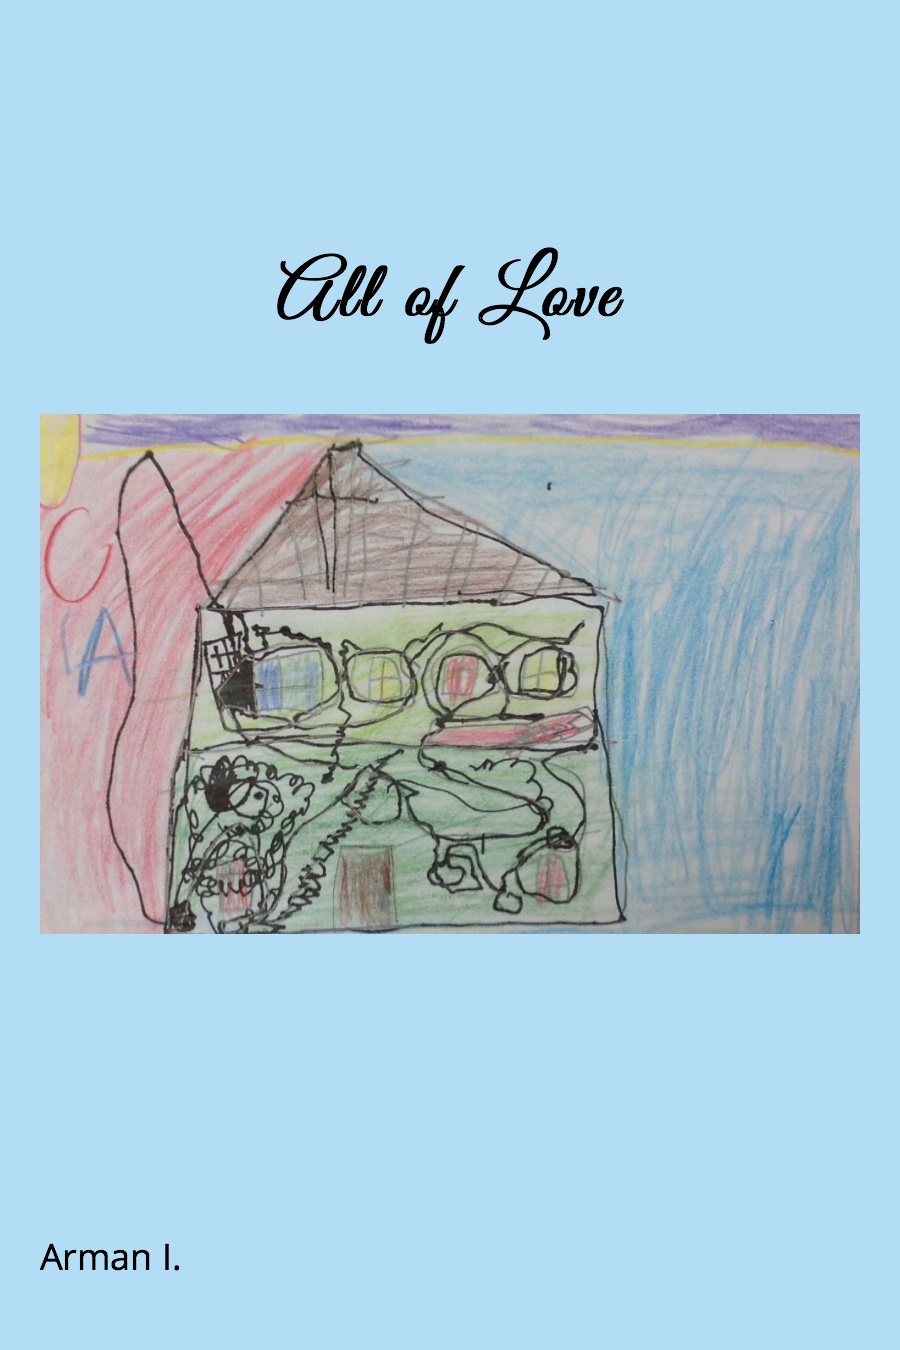 All of Love by Arman I